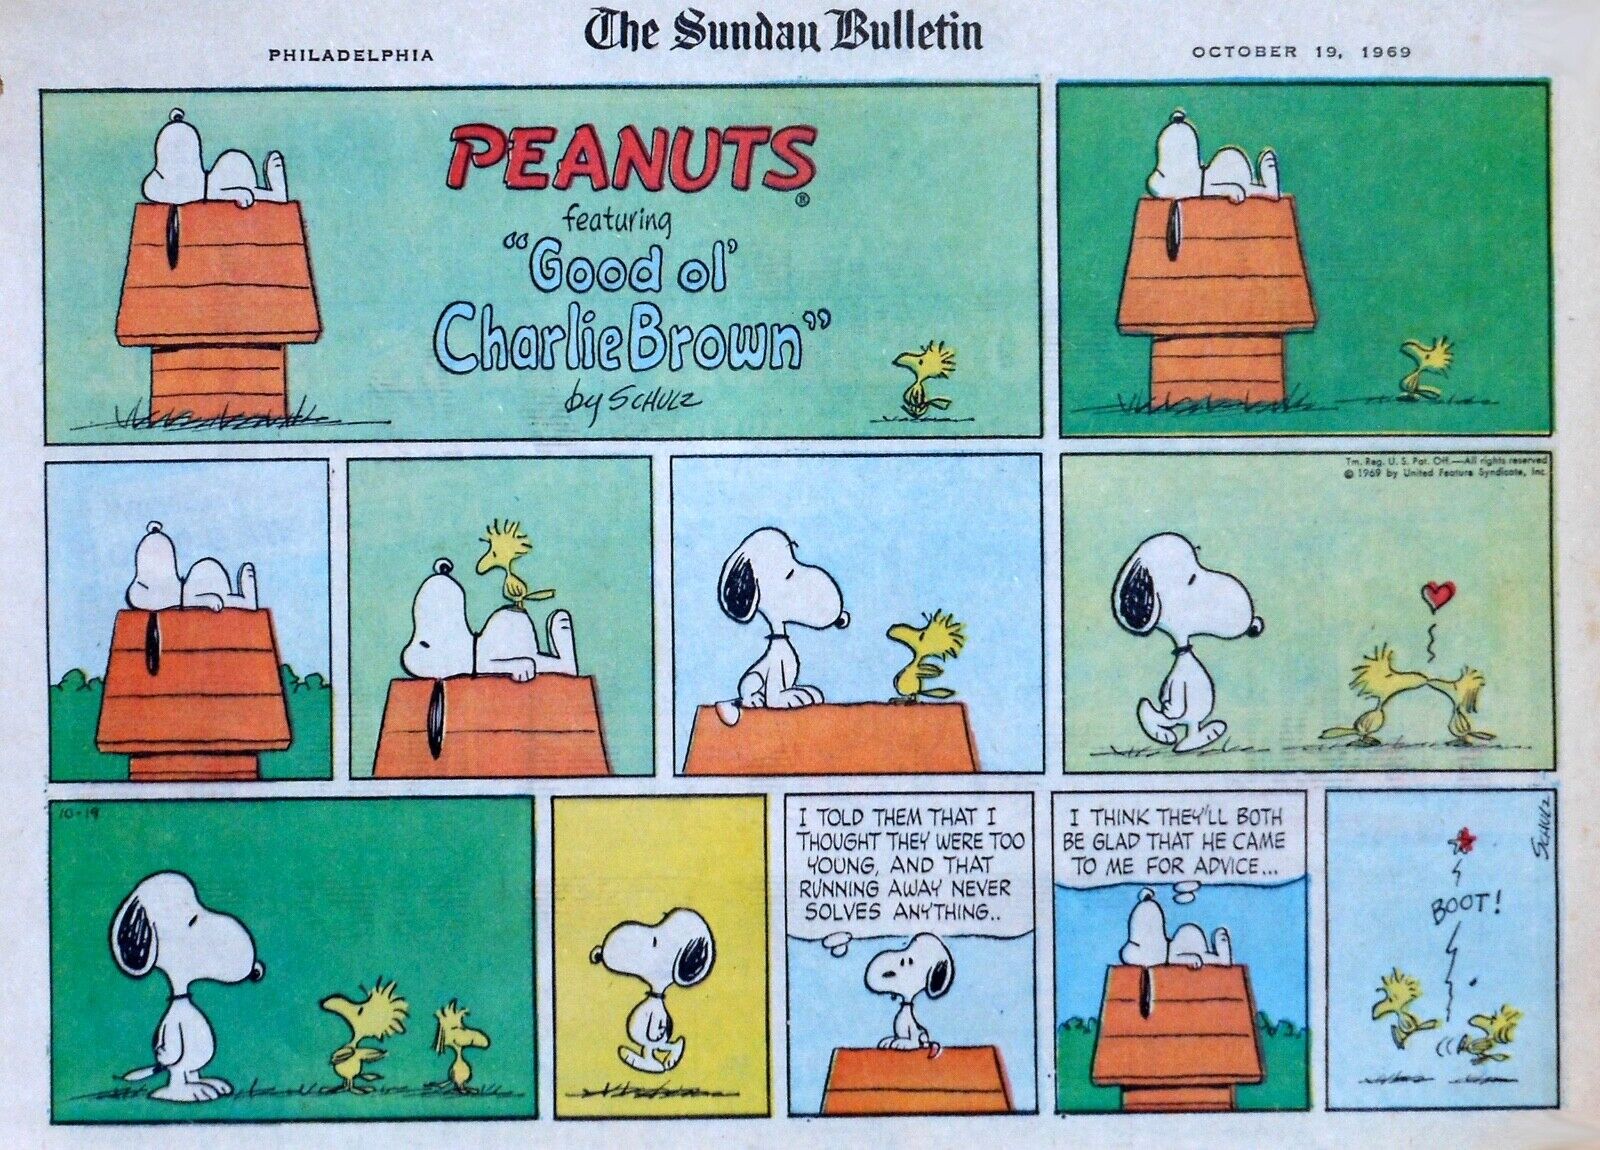 Peanuts by Charles Schulz - large half-page color Sunday comic - Oct. 19, 1969